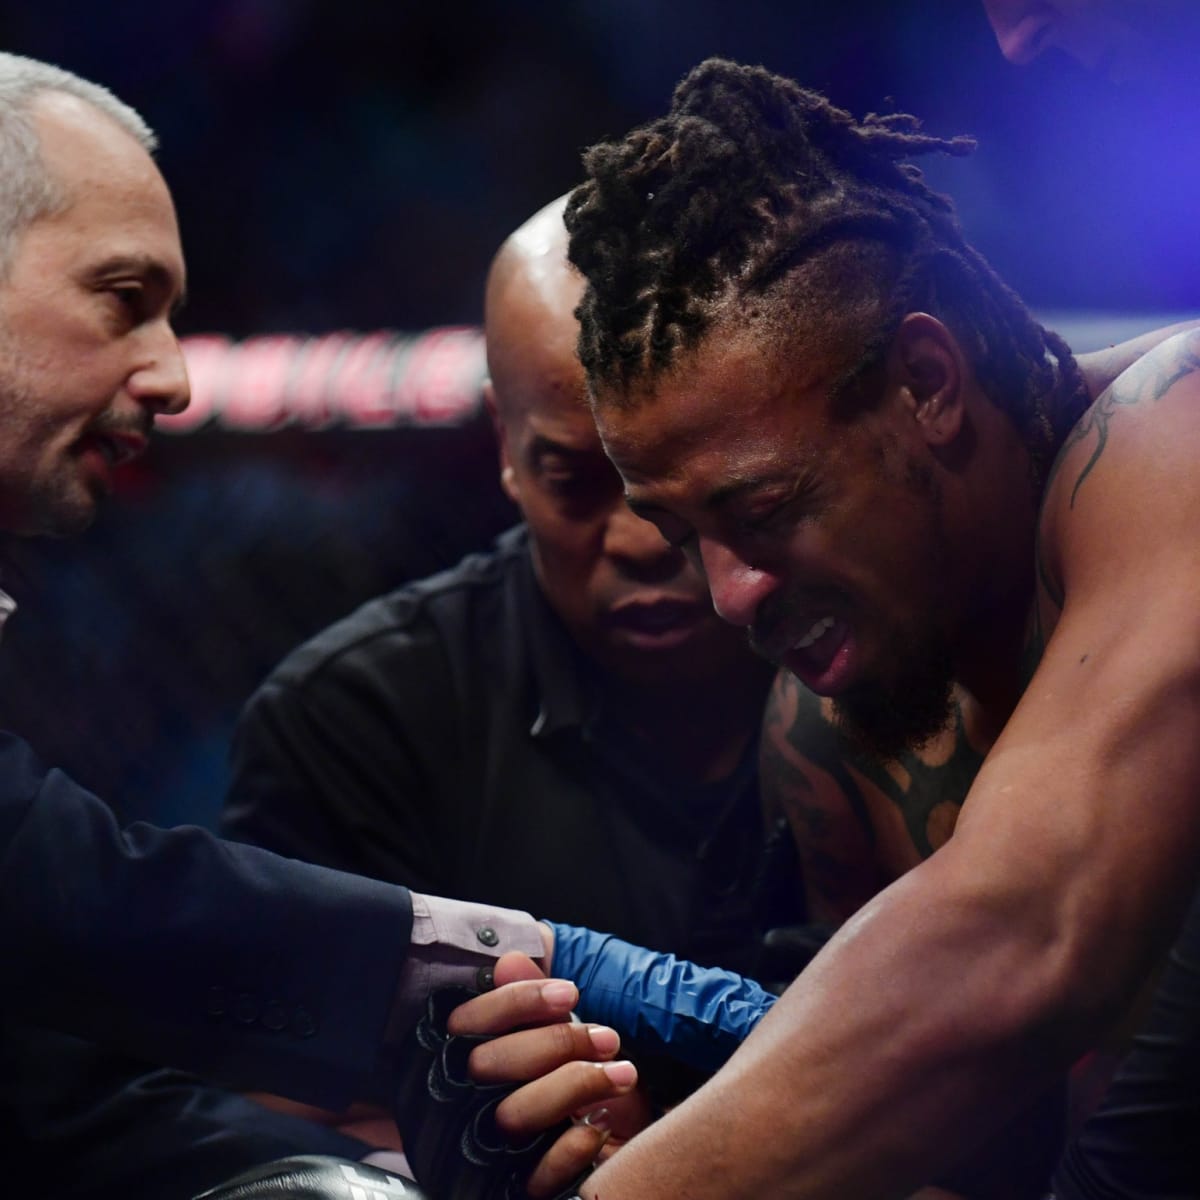 Watch: Former NFL Star Greg Hardy Gets Knocked Out at UFC 264